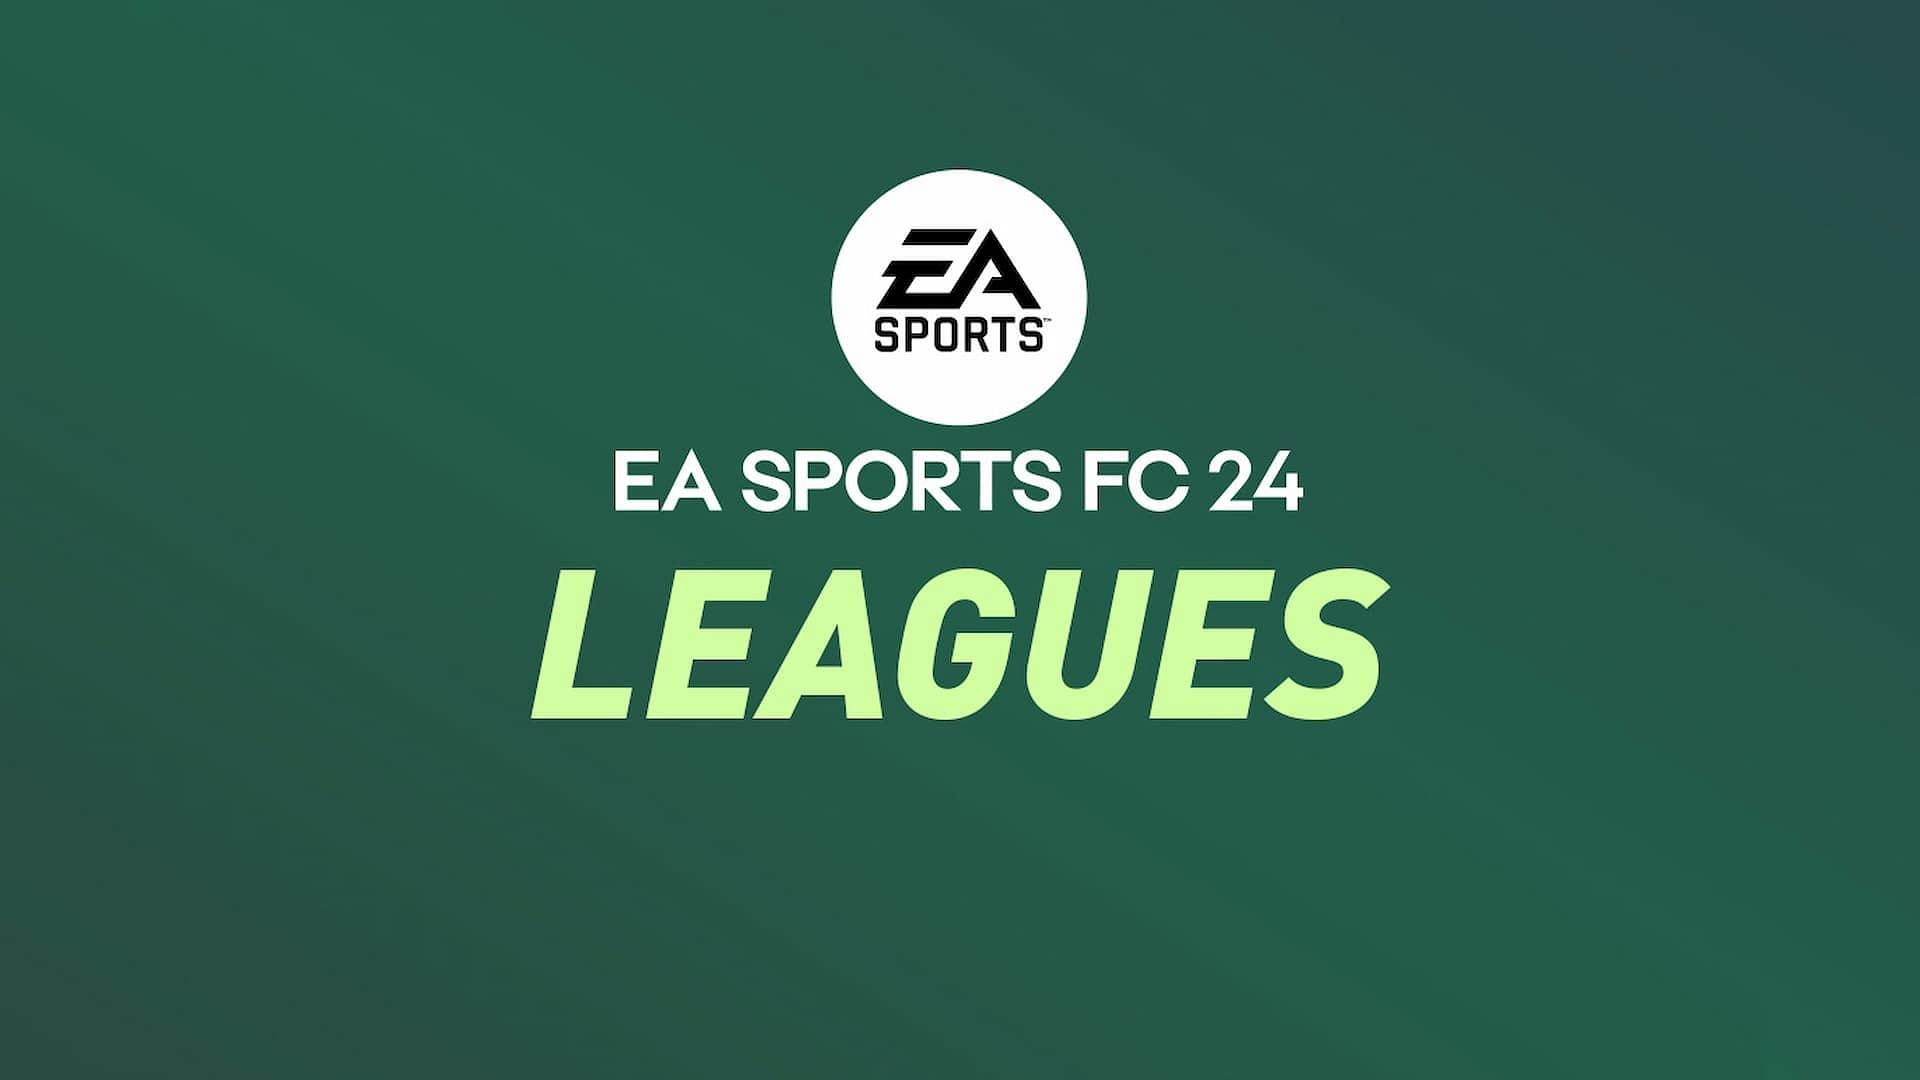 FC 24 Leagues: All confirmed leagues and clubs